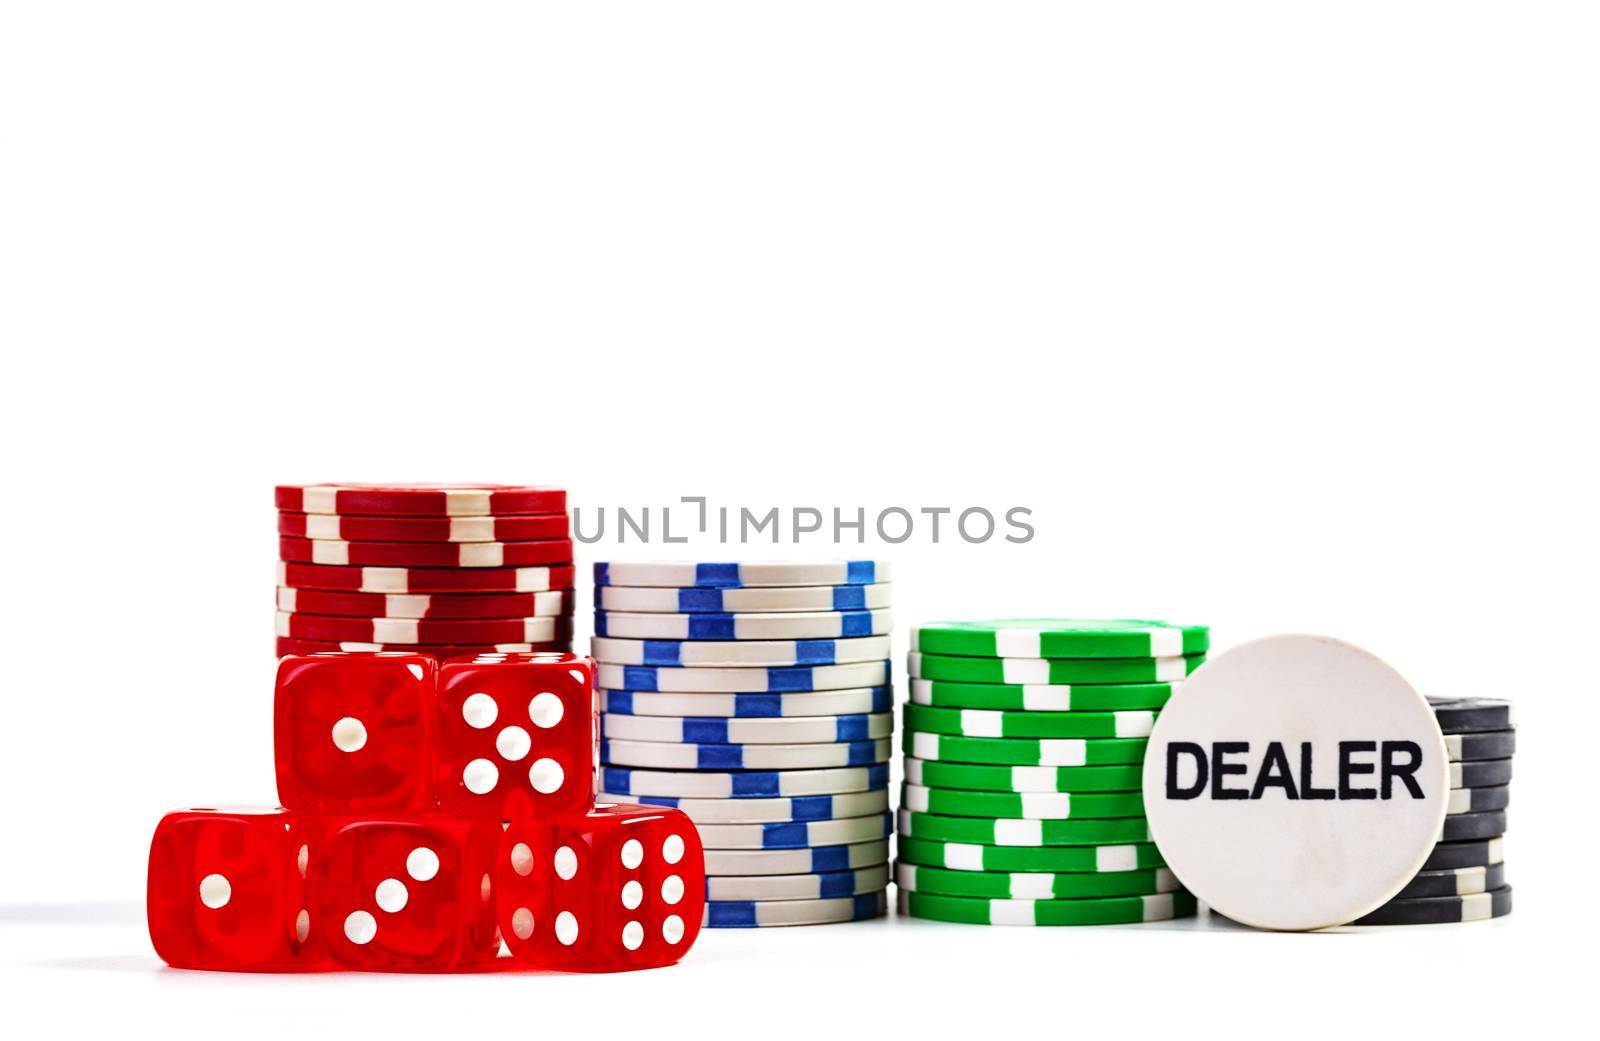 Dealer with Dice by orcearo